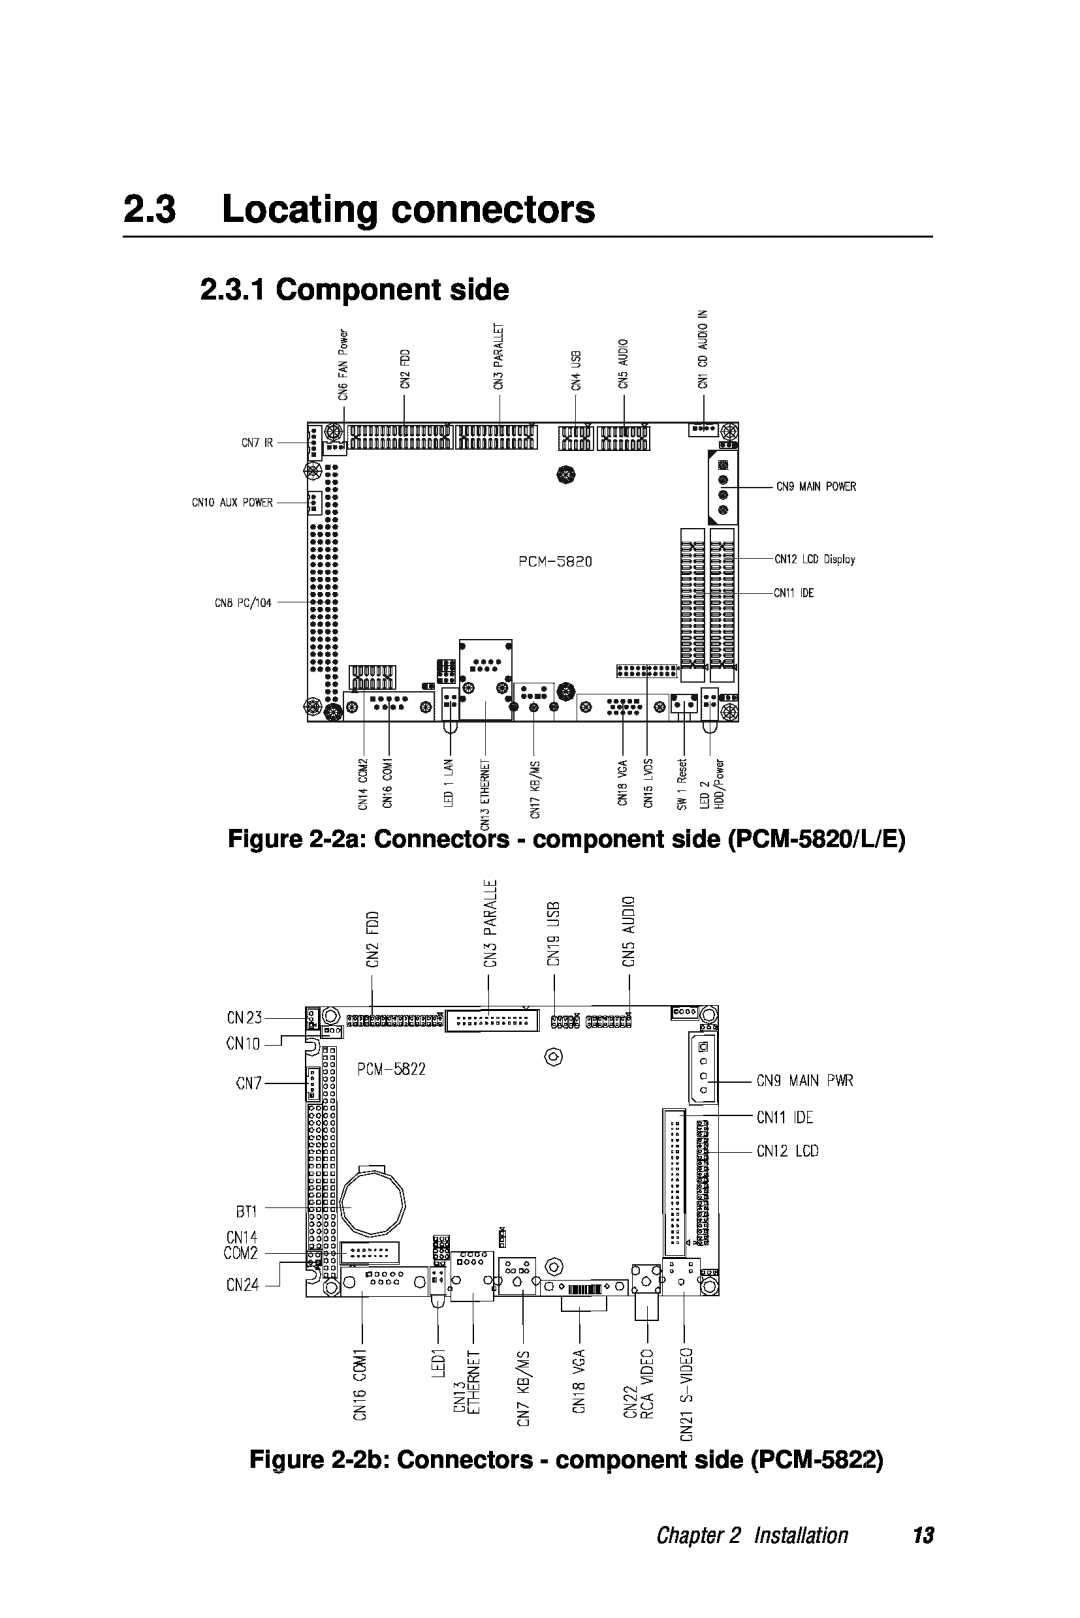 AMD manual Locating connectors, Component side, 2a Connectors - component side PCM-5820/L/E, Installation 